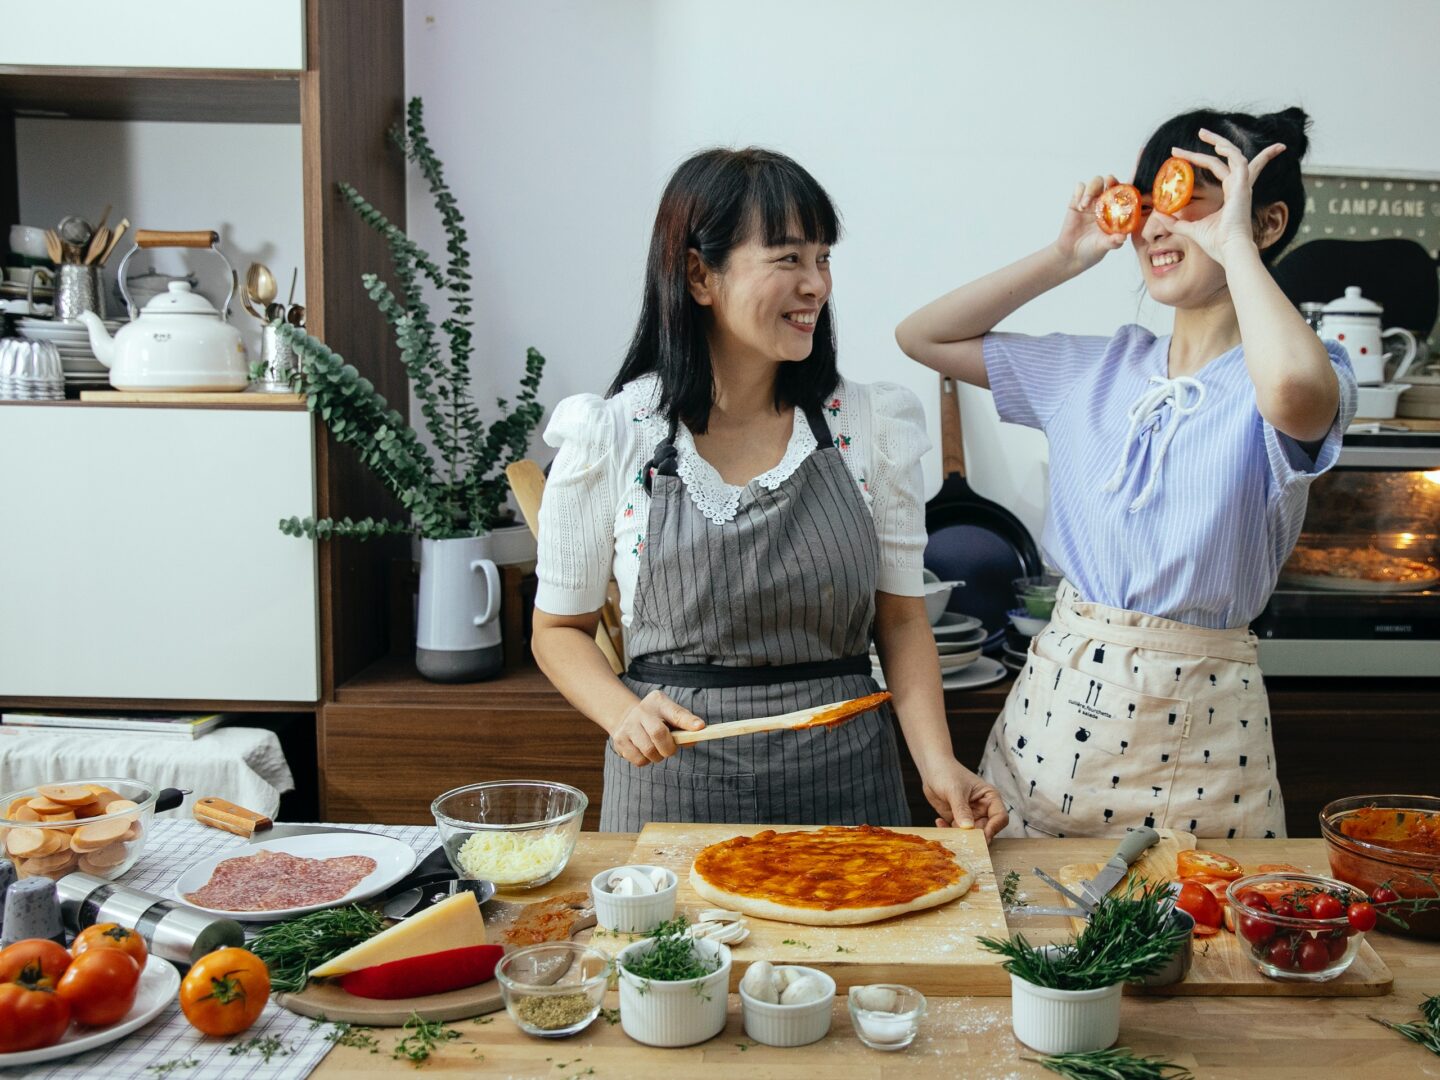 Two women standing in front of a table with food.